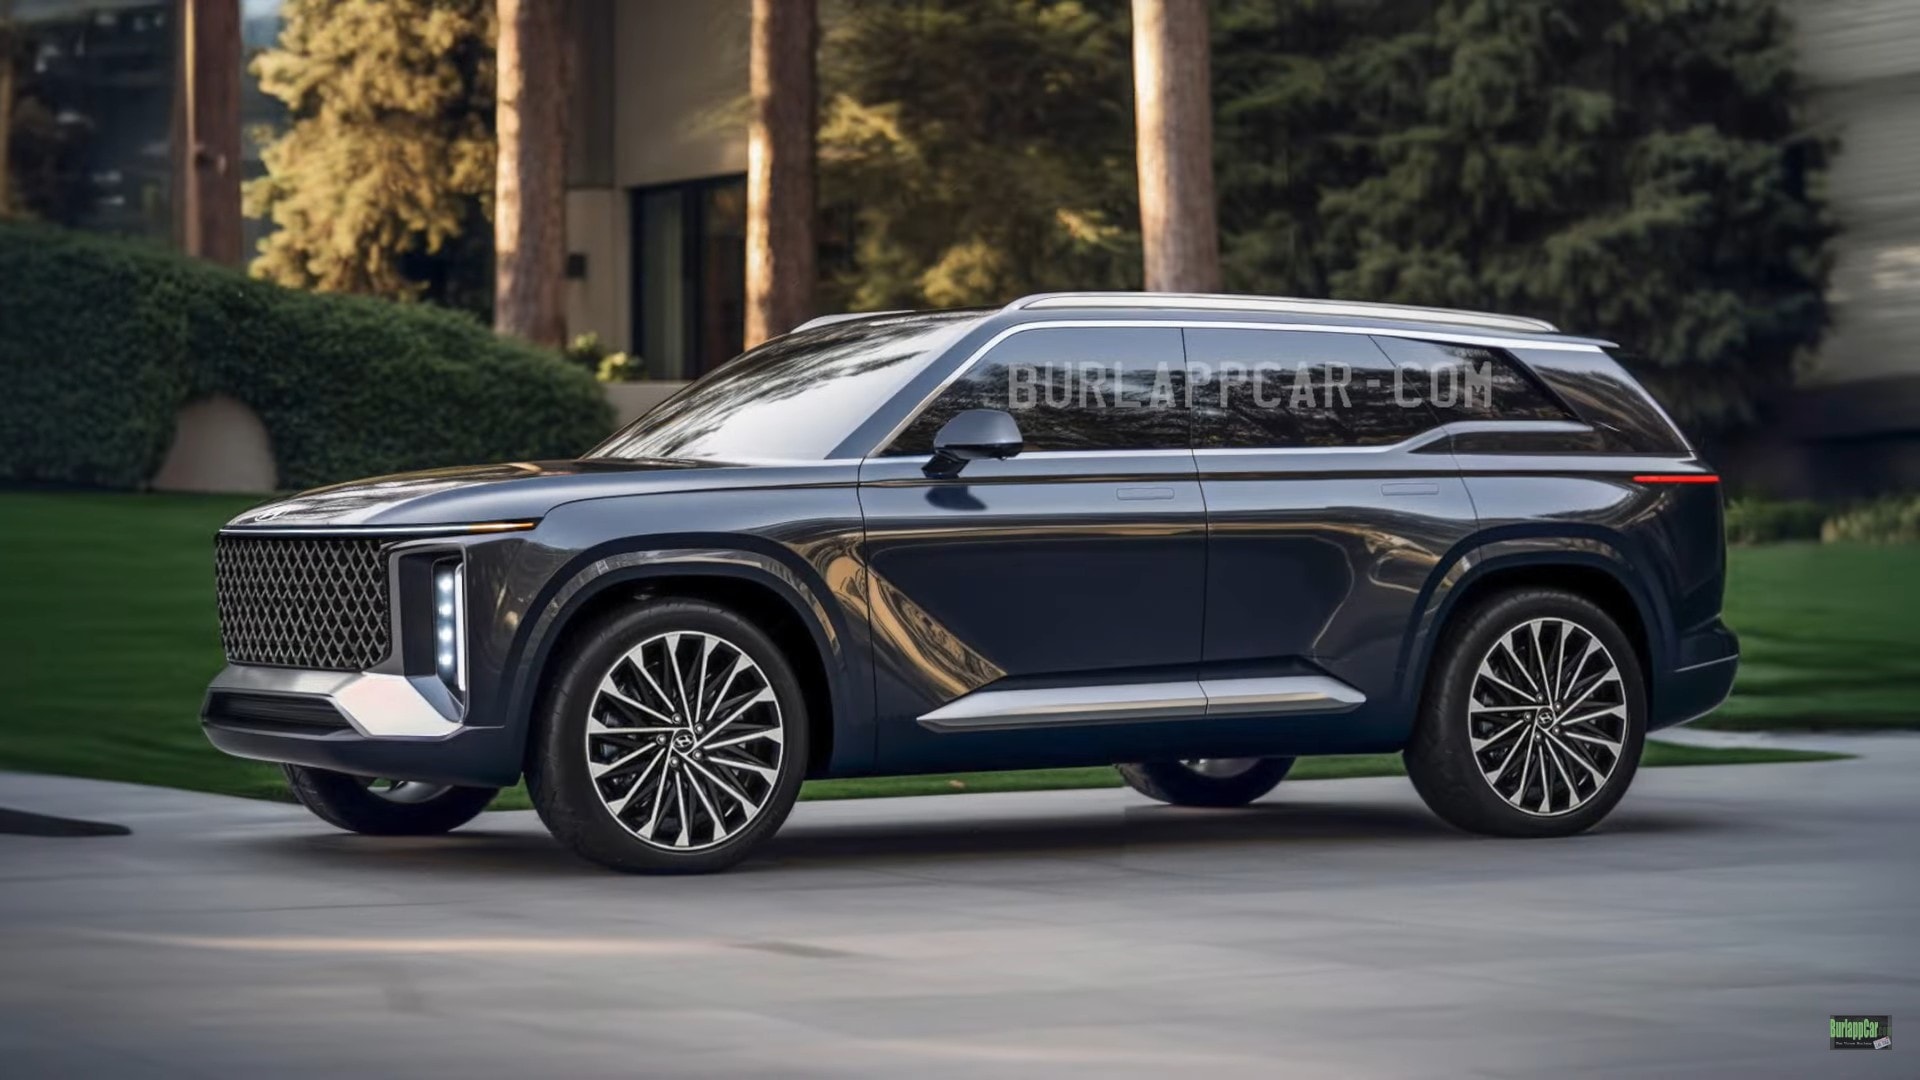 2026-hyundai-palisade-visits-imagination-land-can-t-decide-what-attire-to-wear_2.jpg